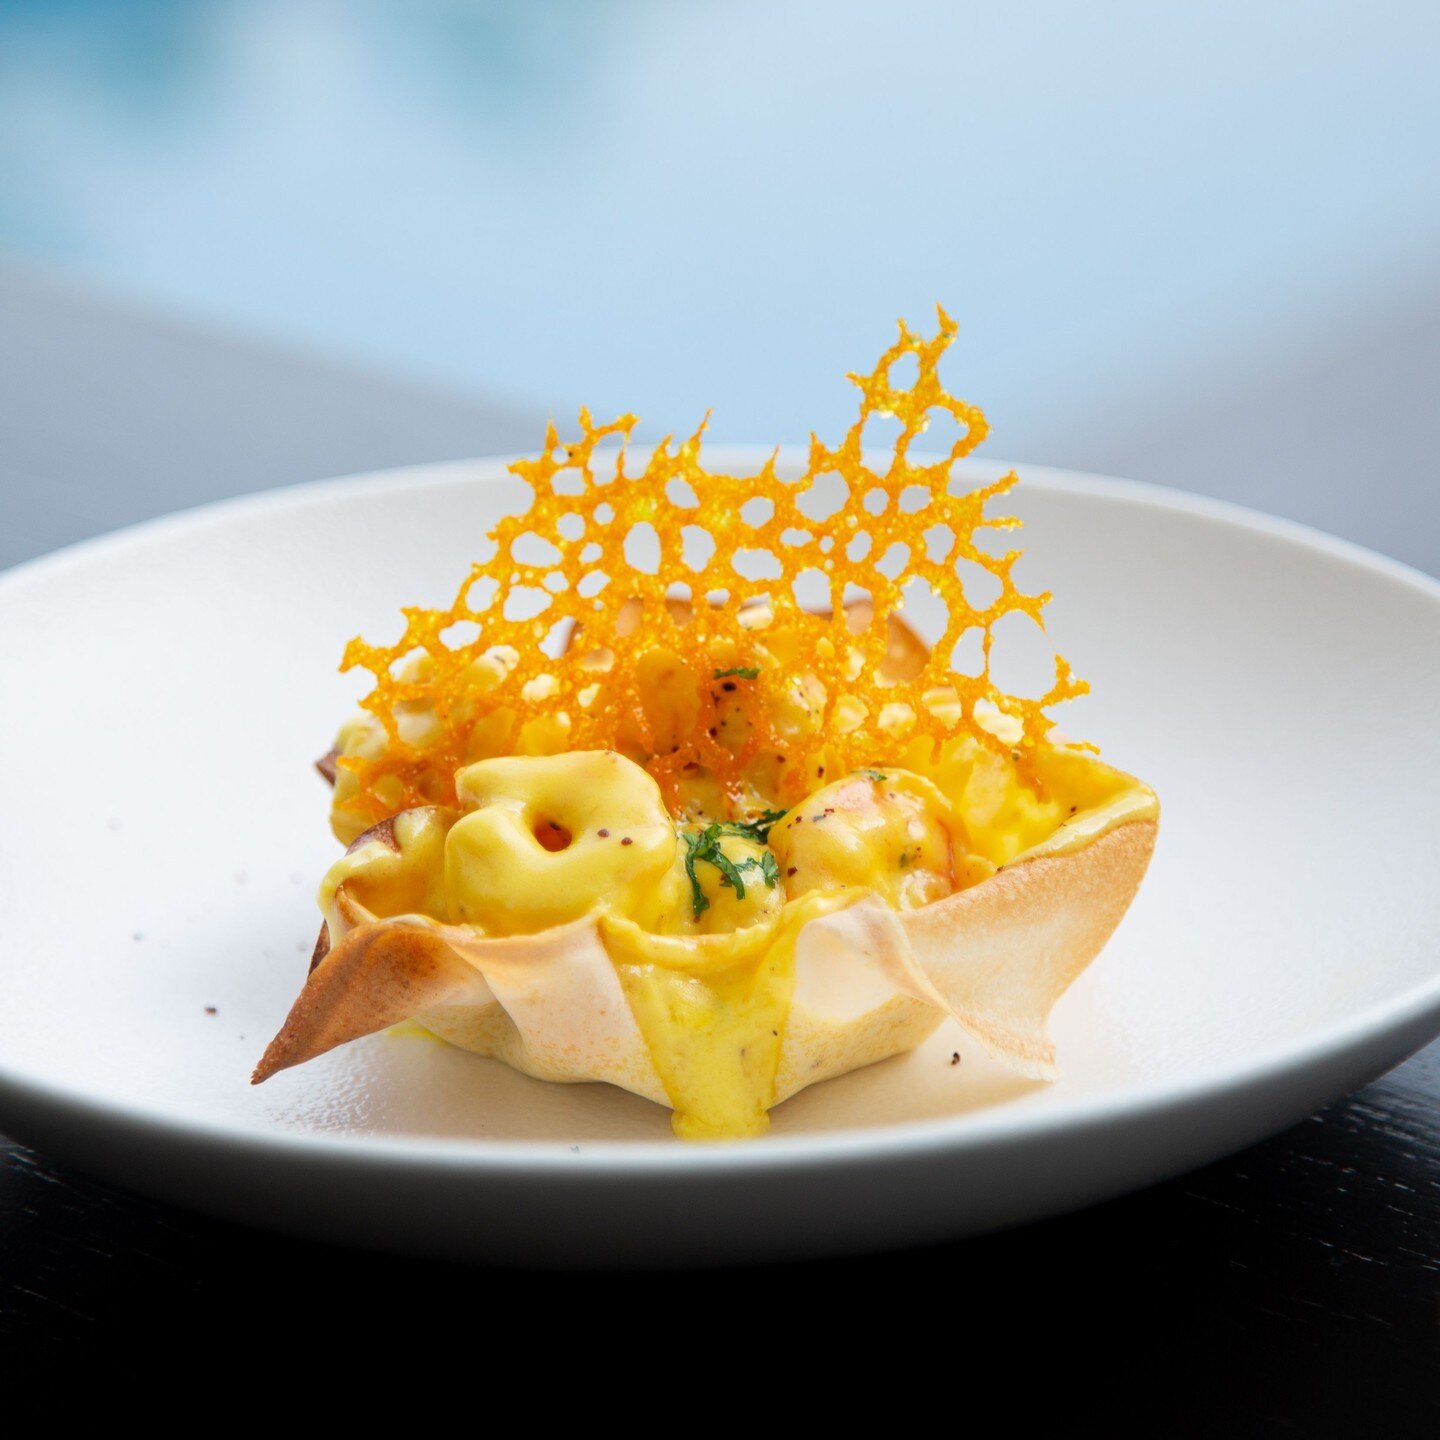 Chef Antonio&rsquo;s delightful &ldquo;ocean tulip&rdquo; is one of our best sellers. 

To reserve, tap the link in our bio

#Oliveto #Italian #EnhanceYourSenses #Bahrain #KSA